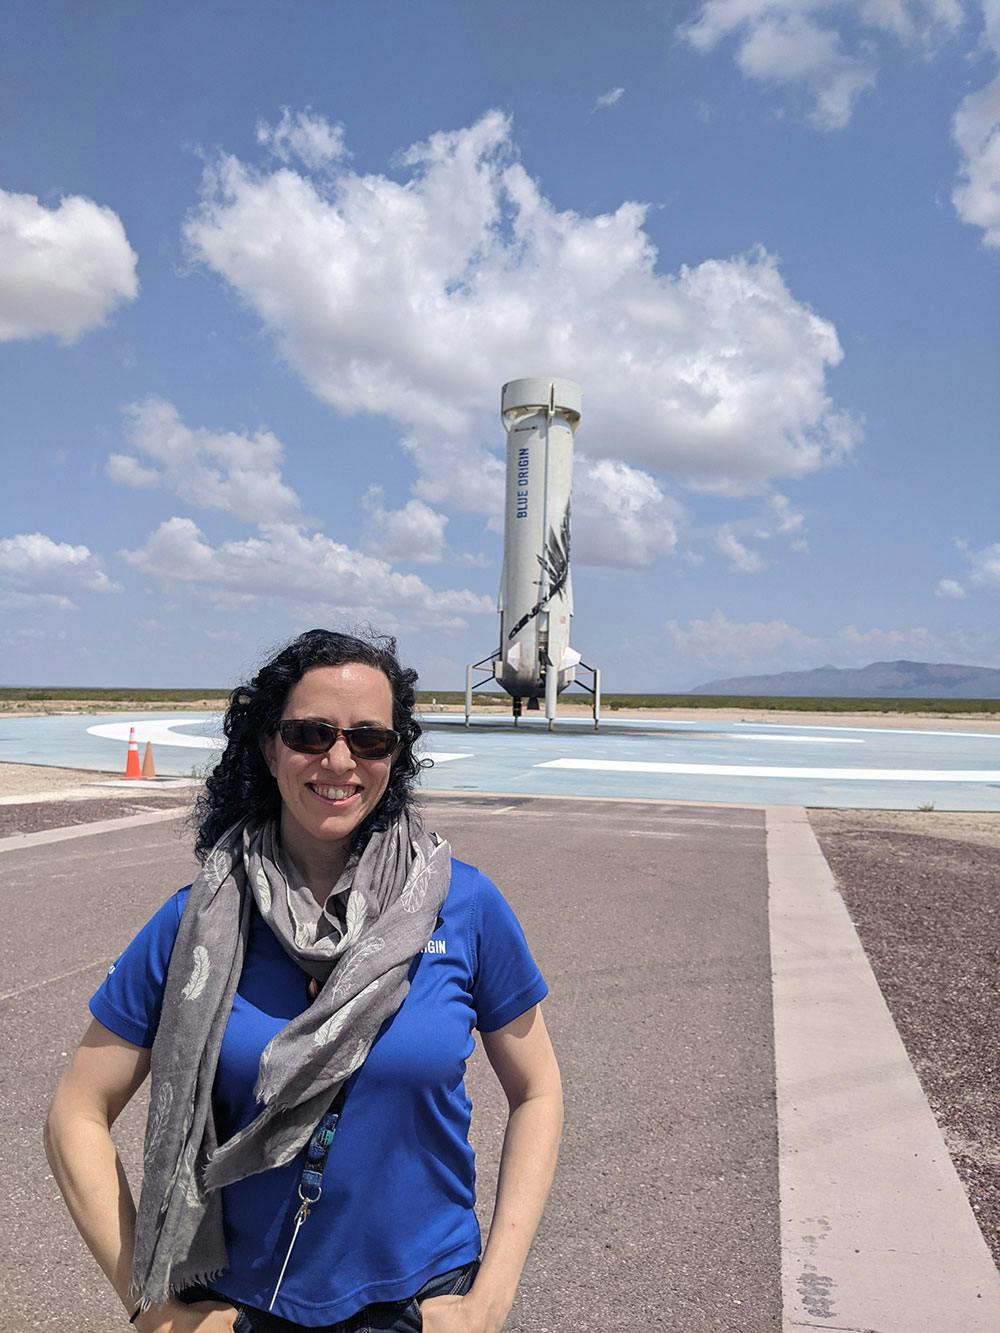 A woman in a blue shirt and gray scarf stands in front of the New Shepard booster on the landing pad